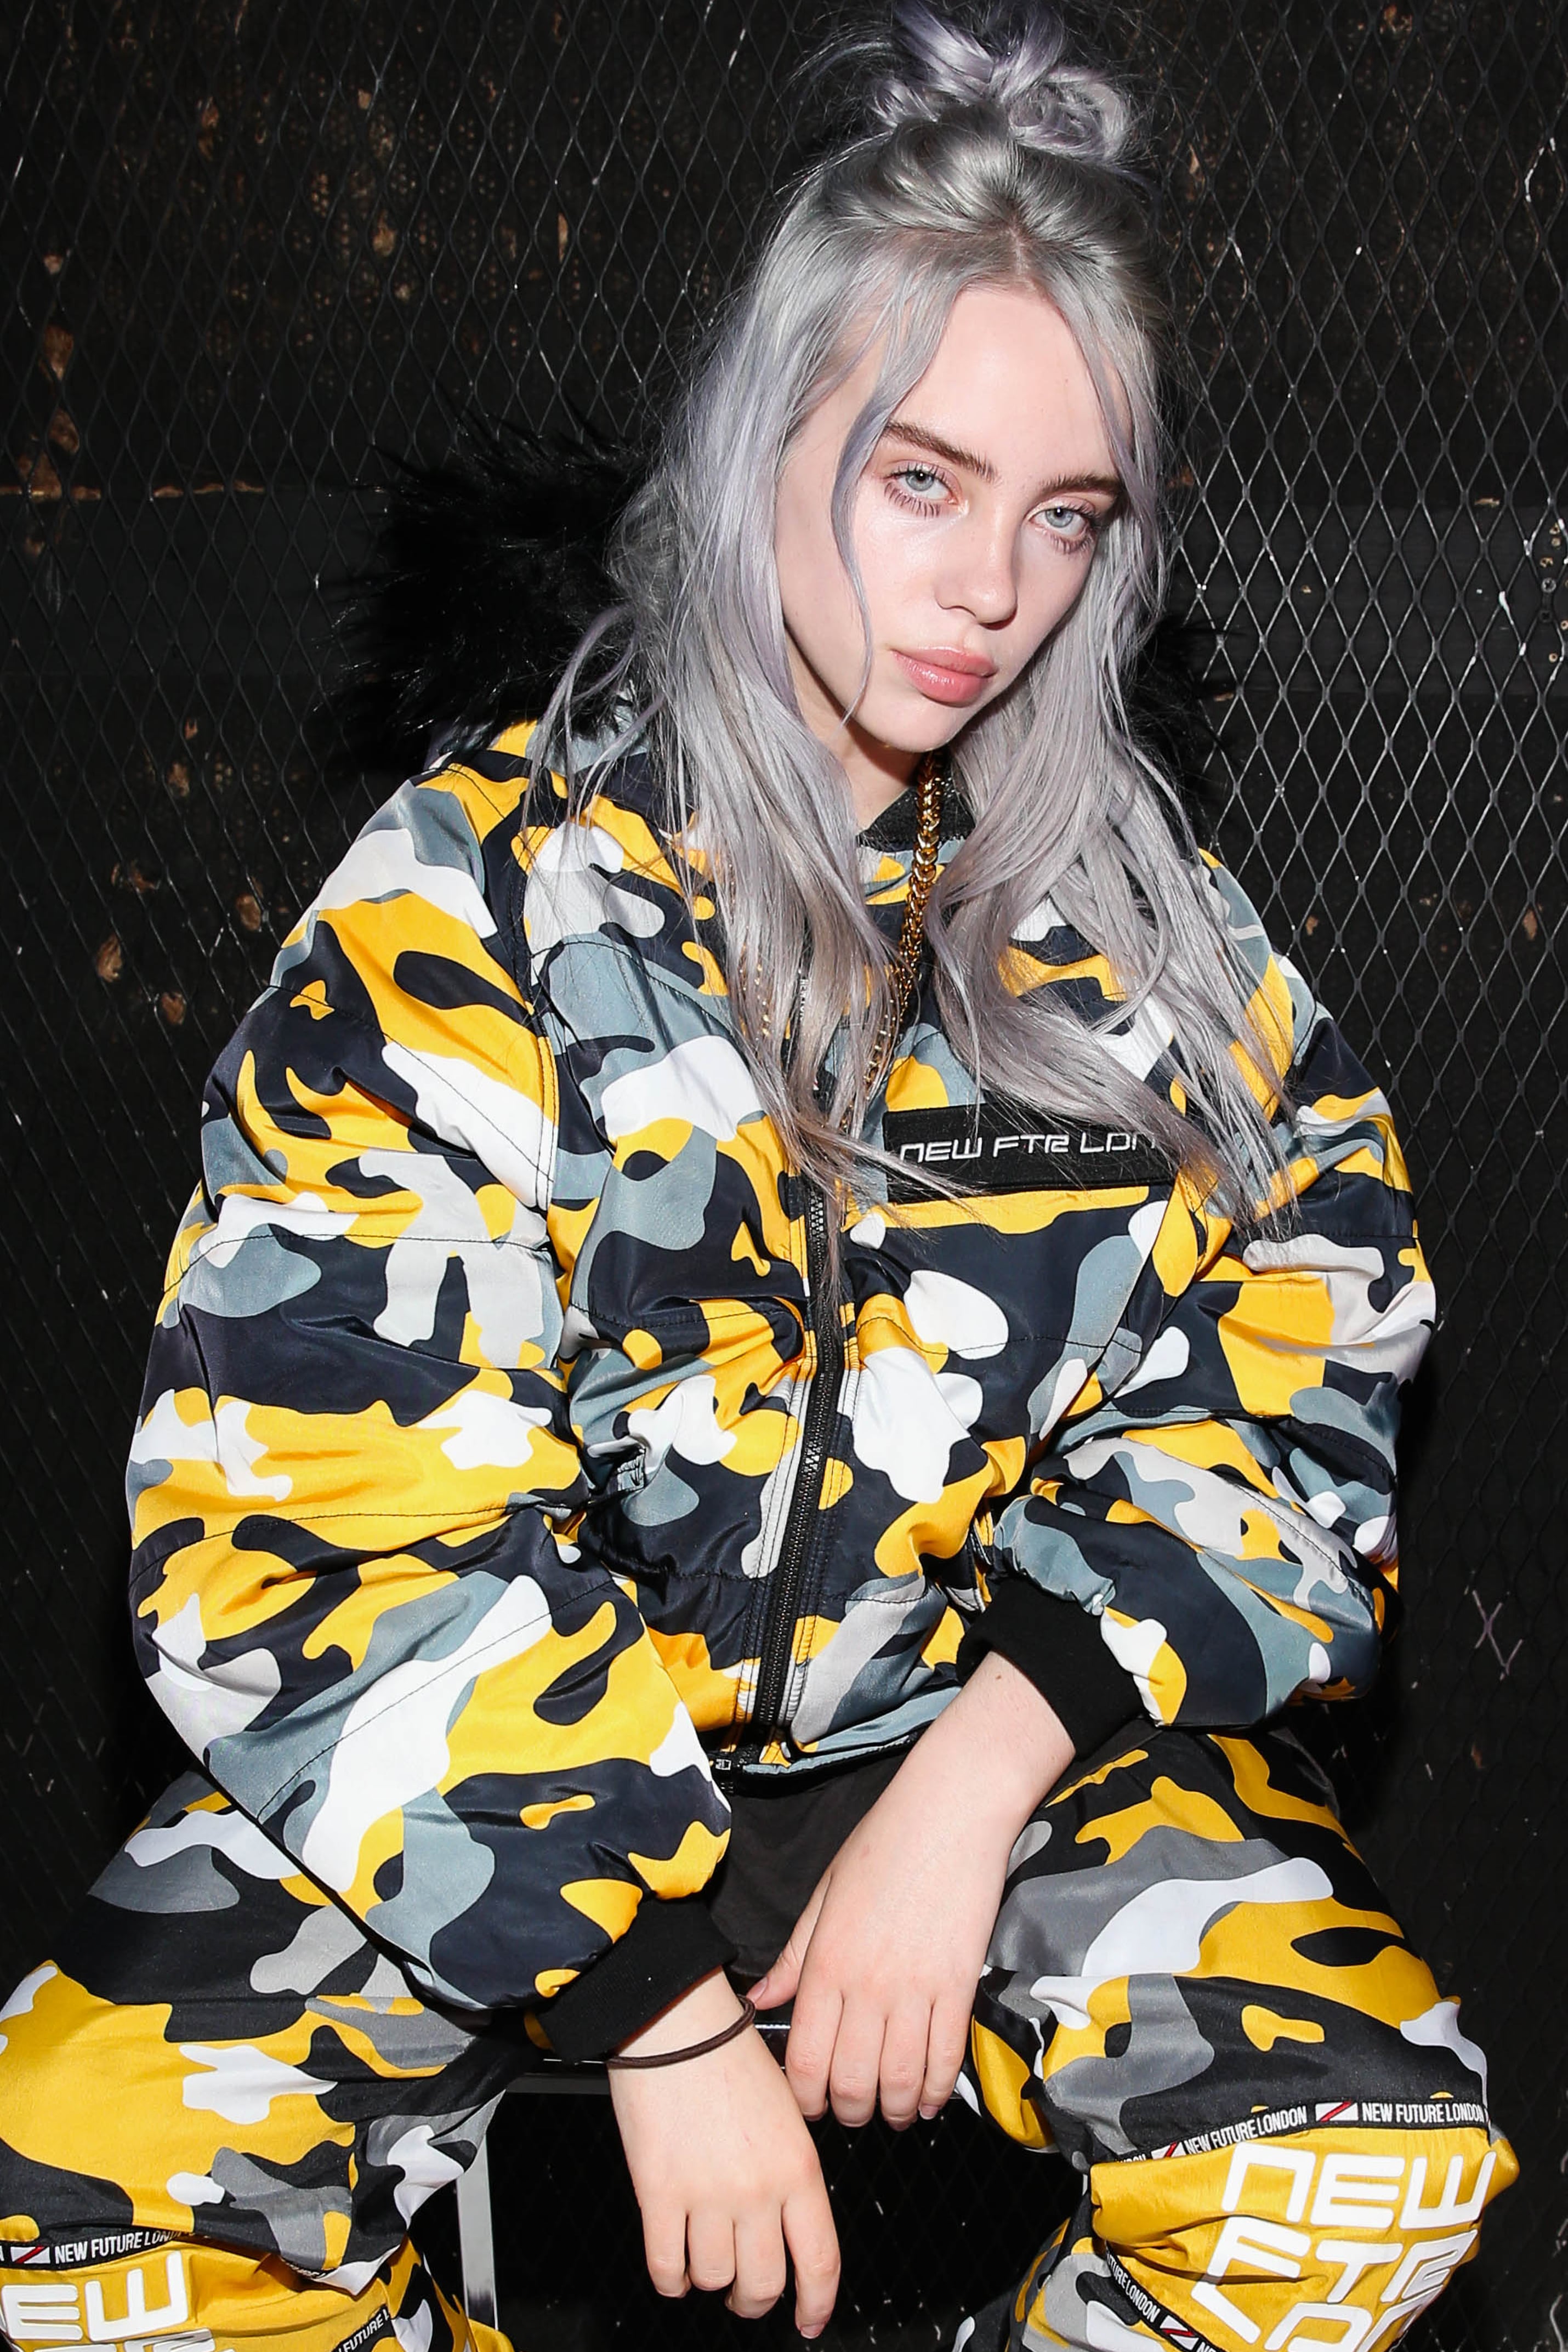 I Just Want To Talk About The Clothes Billie Eilish Wears